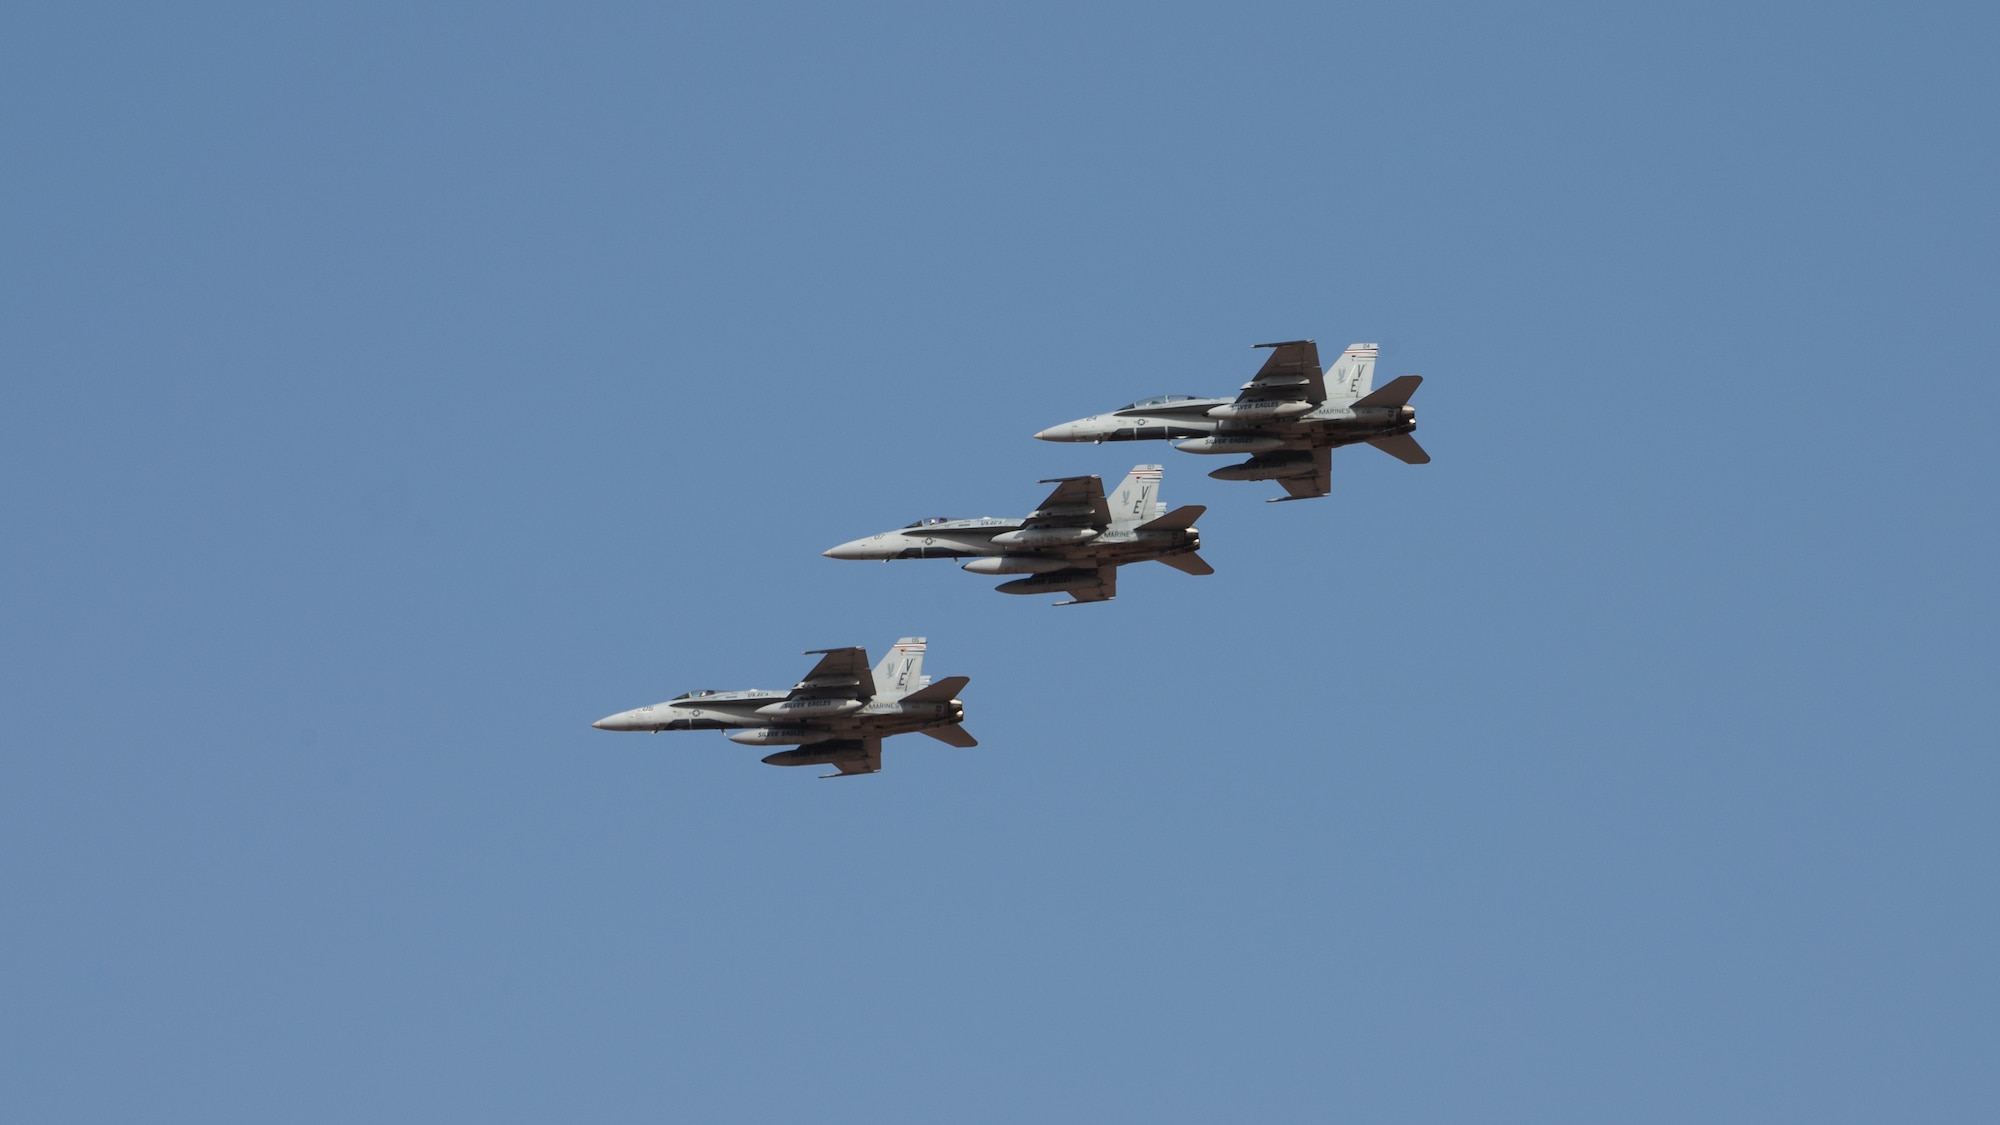 U.S. Marine F/A-18 Hornets from the Marine Fighter Attack Squadron 115 fly over Prince Sultan Air Base, Kingdom of Saudi Arabia, Dec. 23, 2021. The arrival of the Marine Fighter Attack Squadron 115 improves the ability of the Combined Forces Air Component Commander to move forces fluidly across the theatre. (U.S. Air Force photo by Senior Airman Jacob B. Wrightsman)